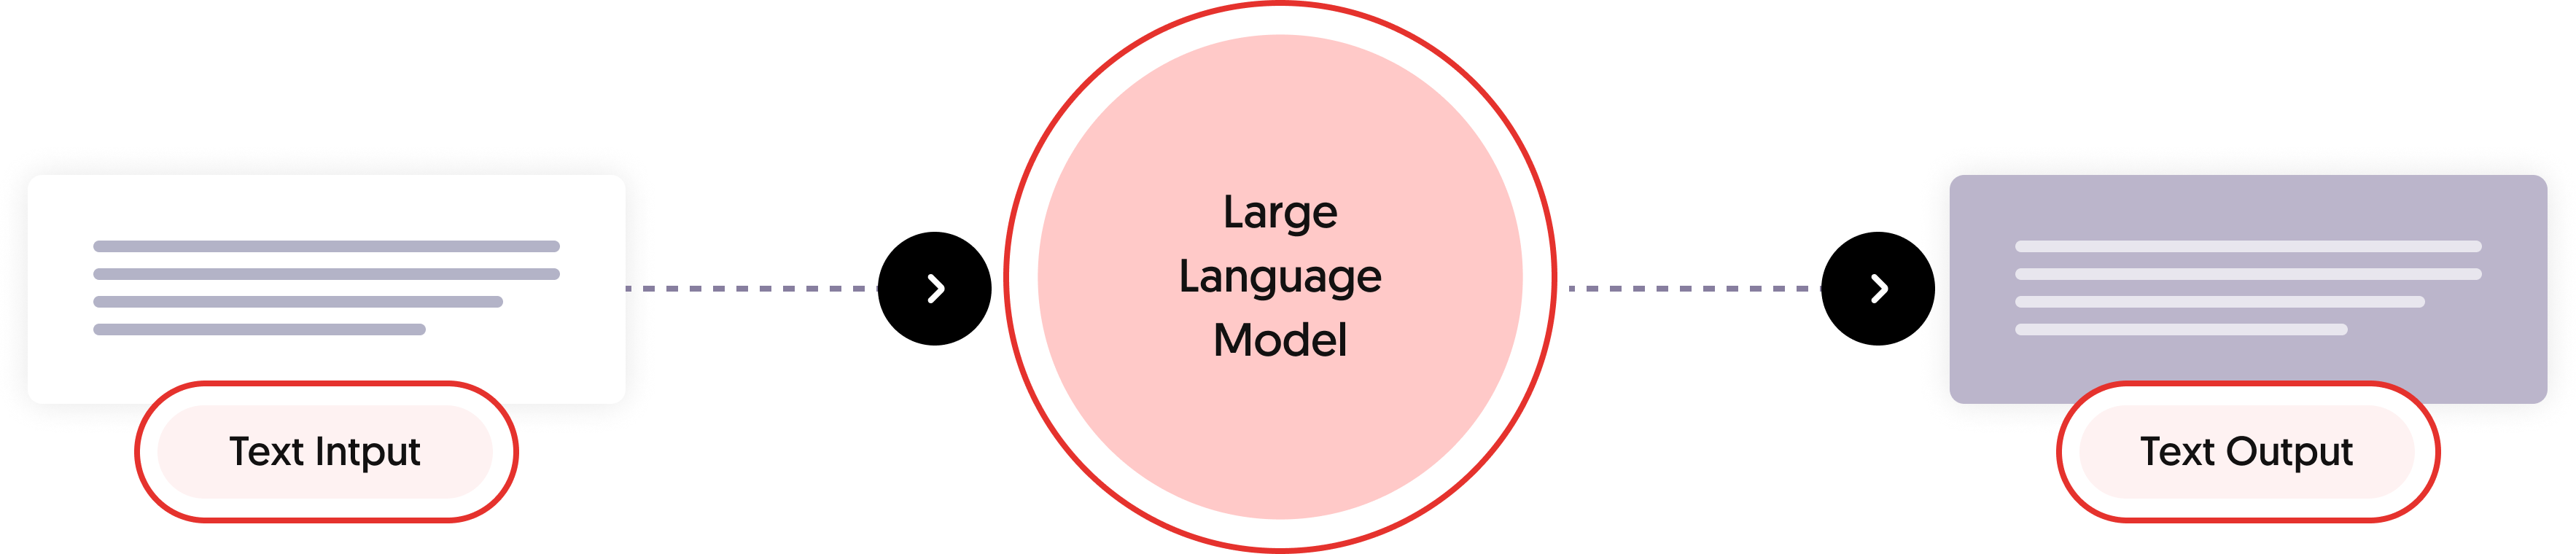 Graphic showing the input and output of a large language model